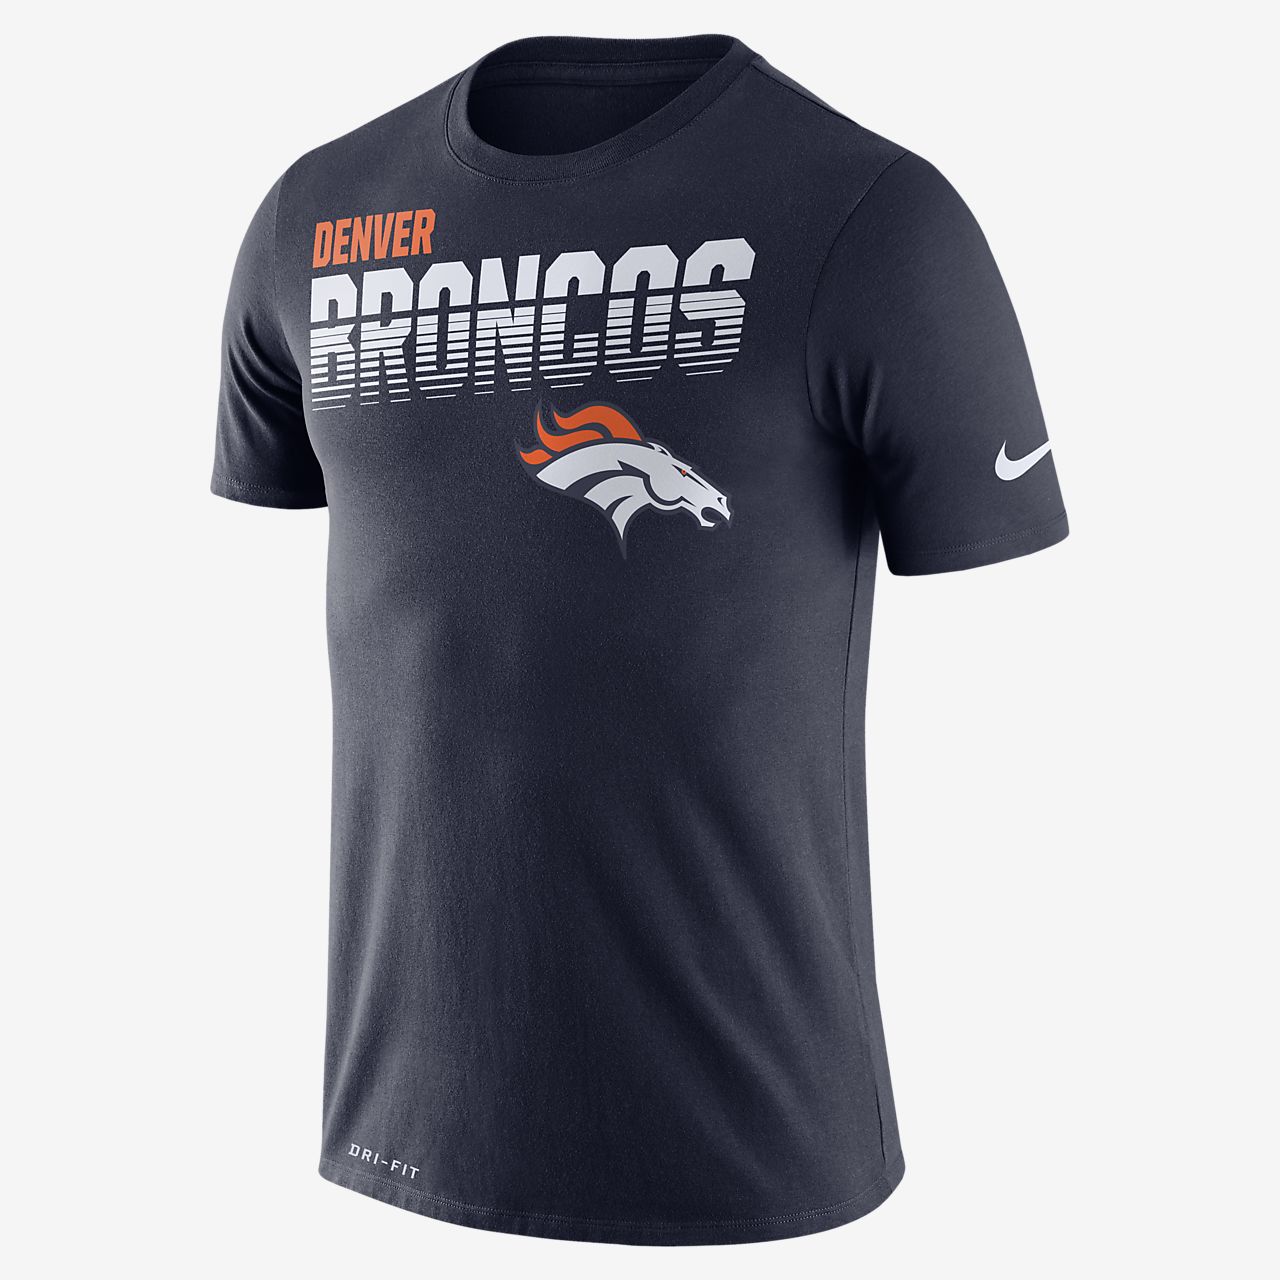 where can i find a broncos shirt